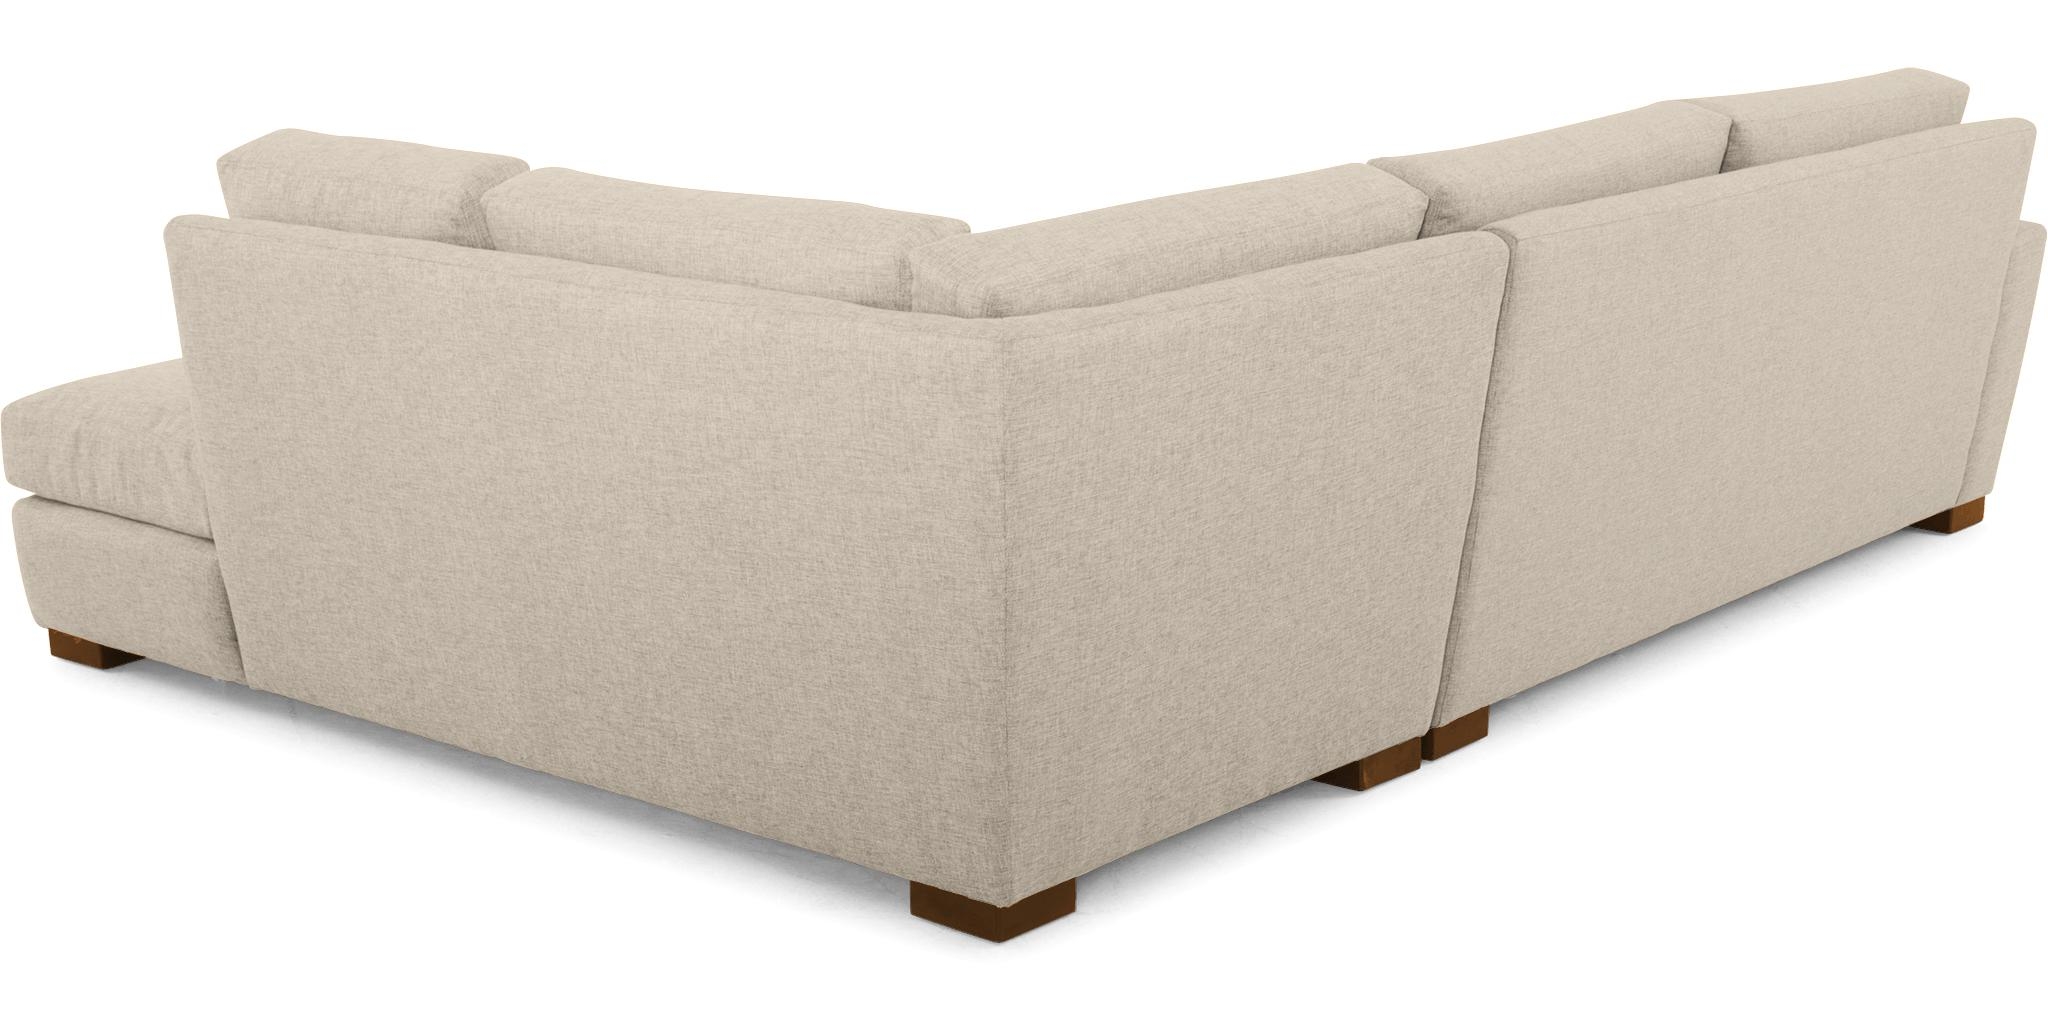 Beige/White Anton Mid Century Modern Sectional with Bumper - Cody Sandstone - Mocha - Right  - Image 4